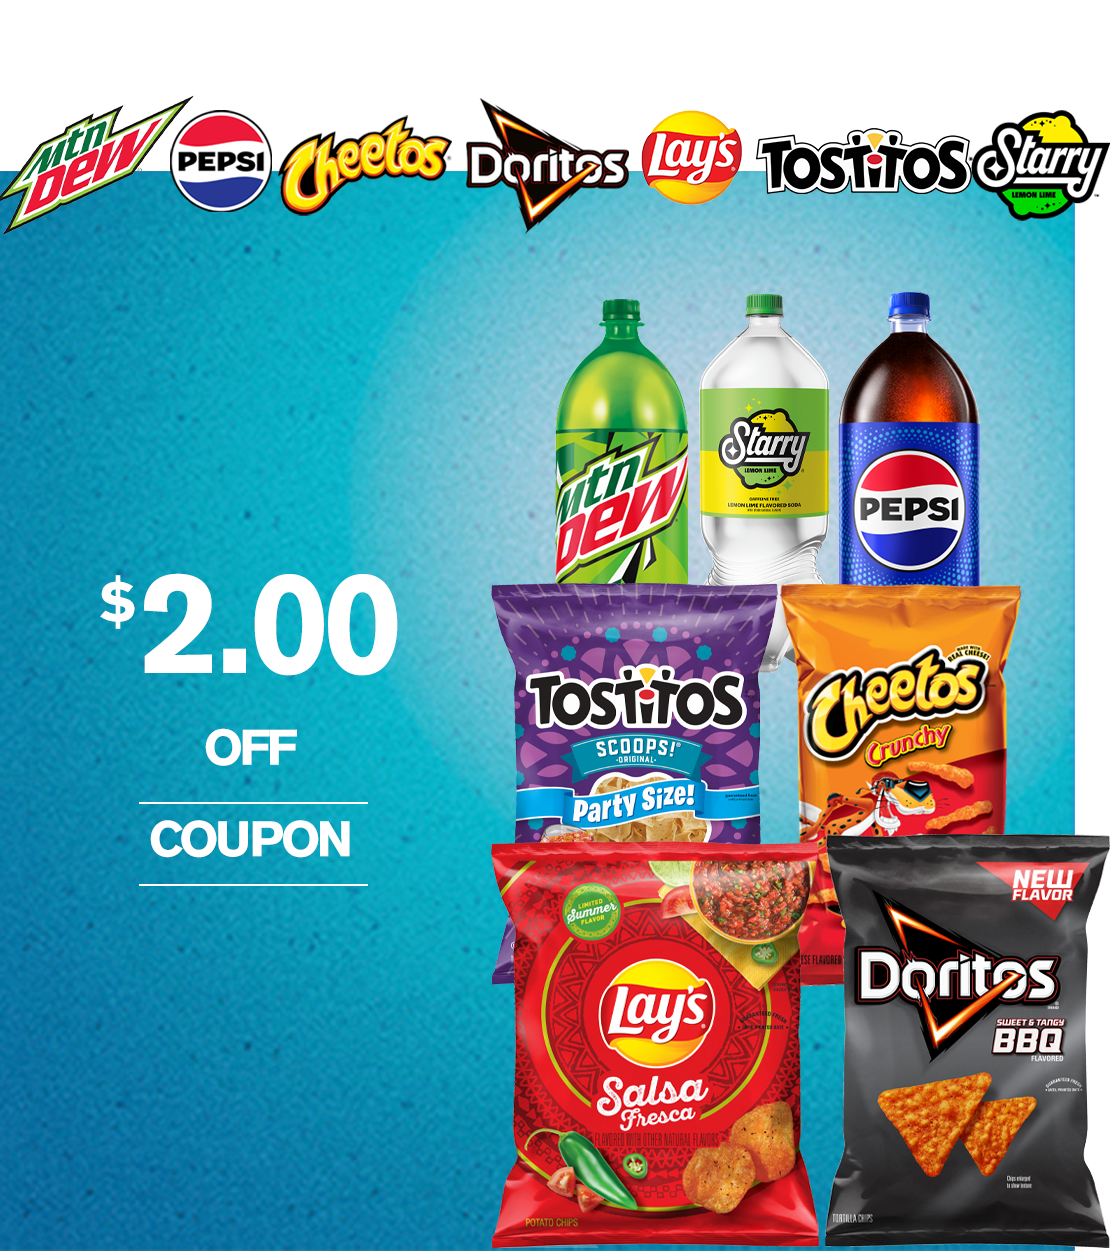 Save $2.00 on Lay's, Doritos, Cheetos, Tostitos, MTN DEW, Starry and Pepsi